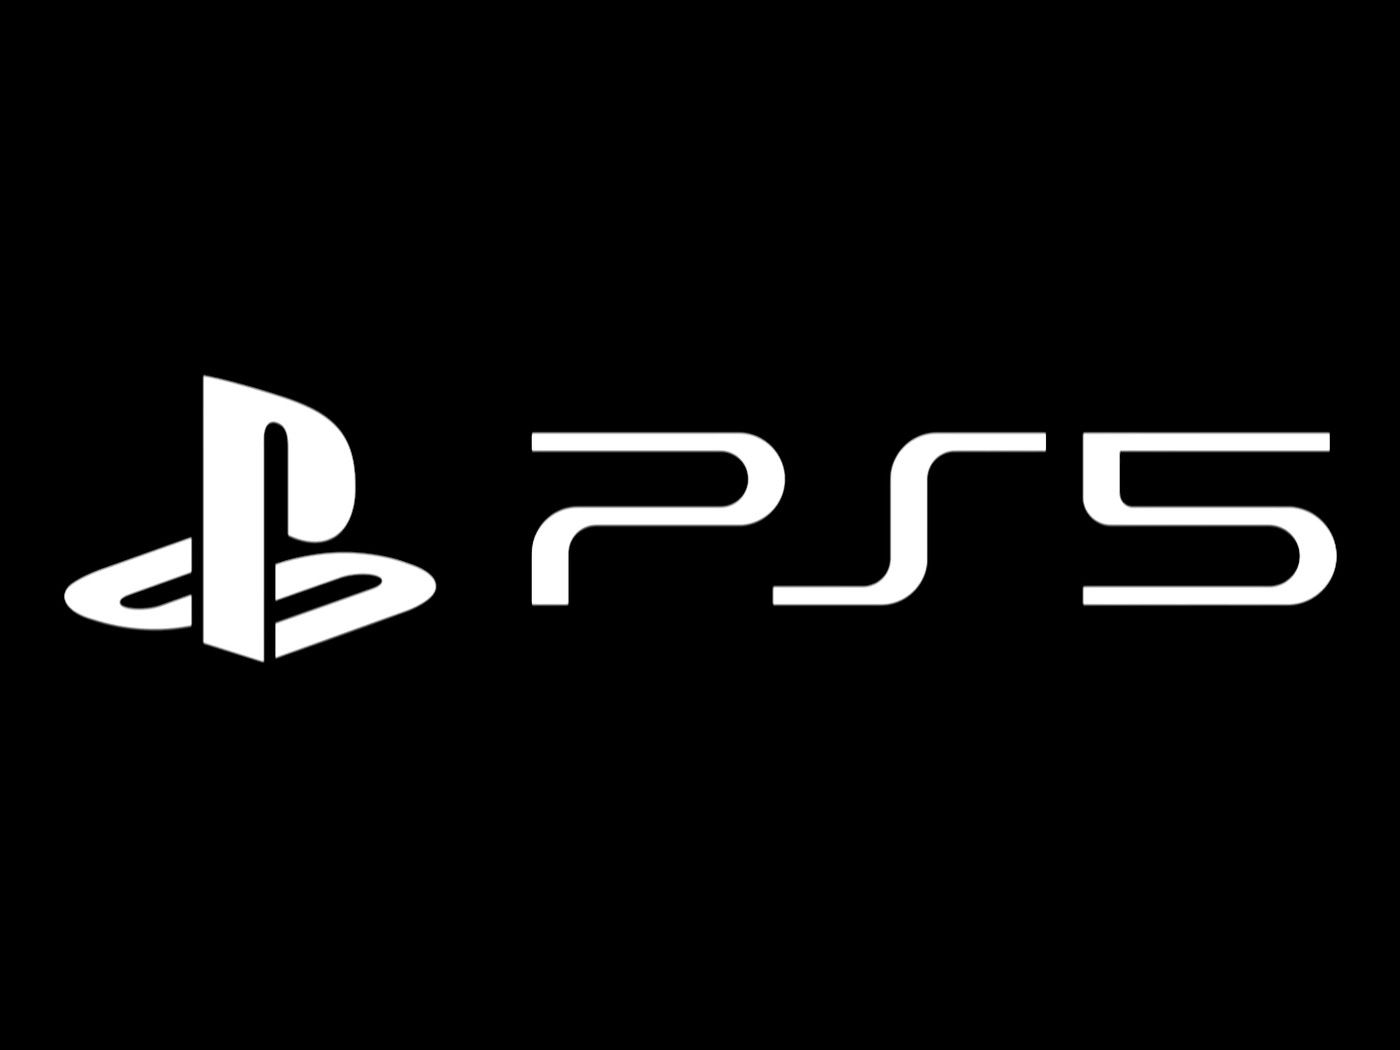 Sony reveals new PS5 logo, which looks familiar